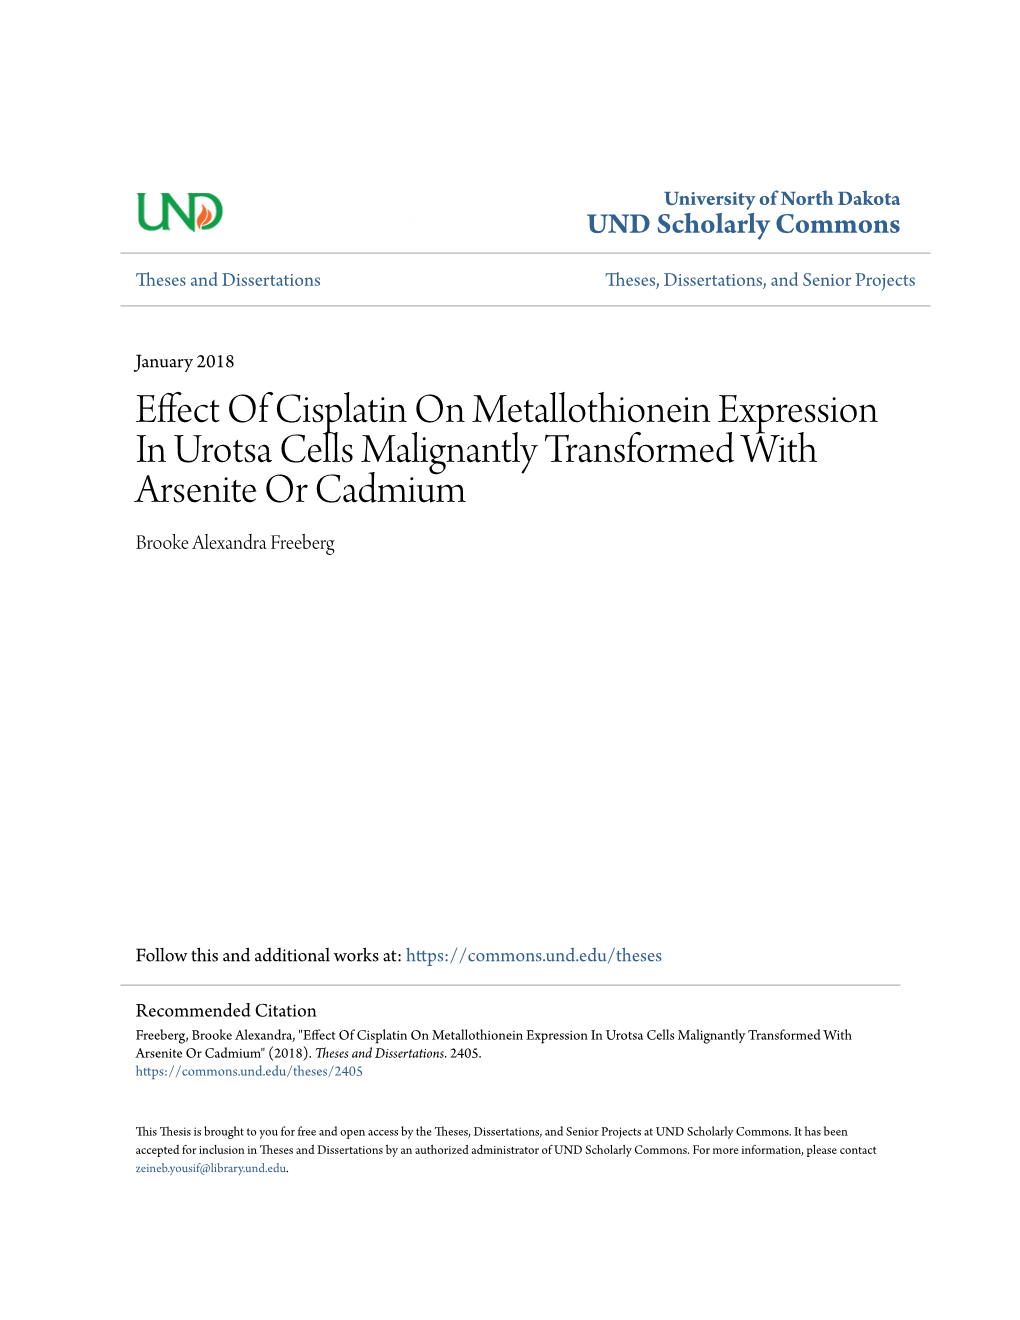 Effect of Cisplatin on Metallothionein Expression in Urotsa Cells Malignantly Transformed with Arsenite Or Cadmium Brooke Alexandra Freeberg